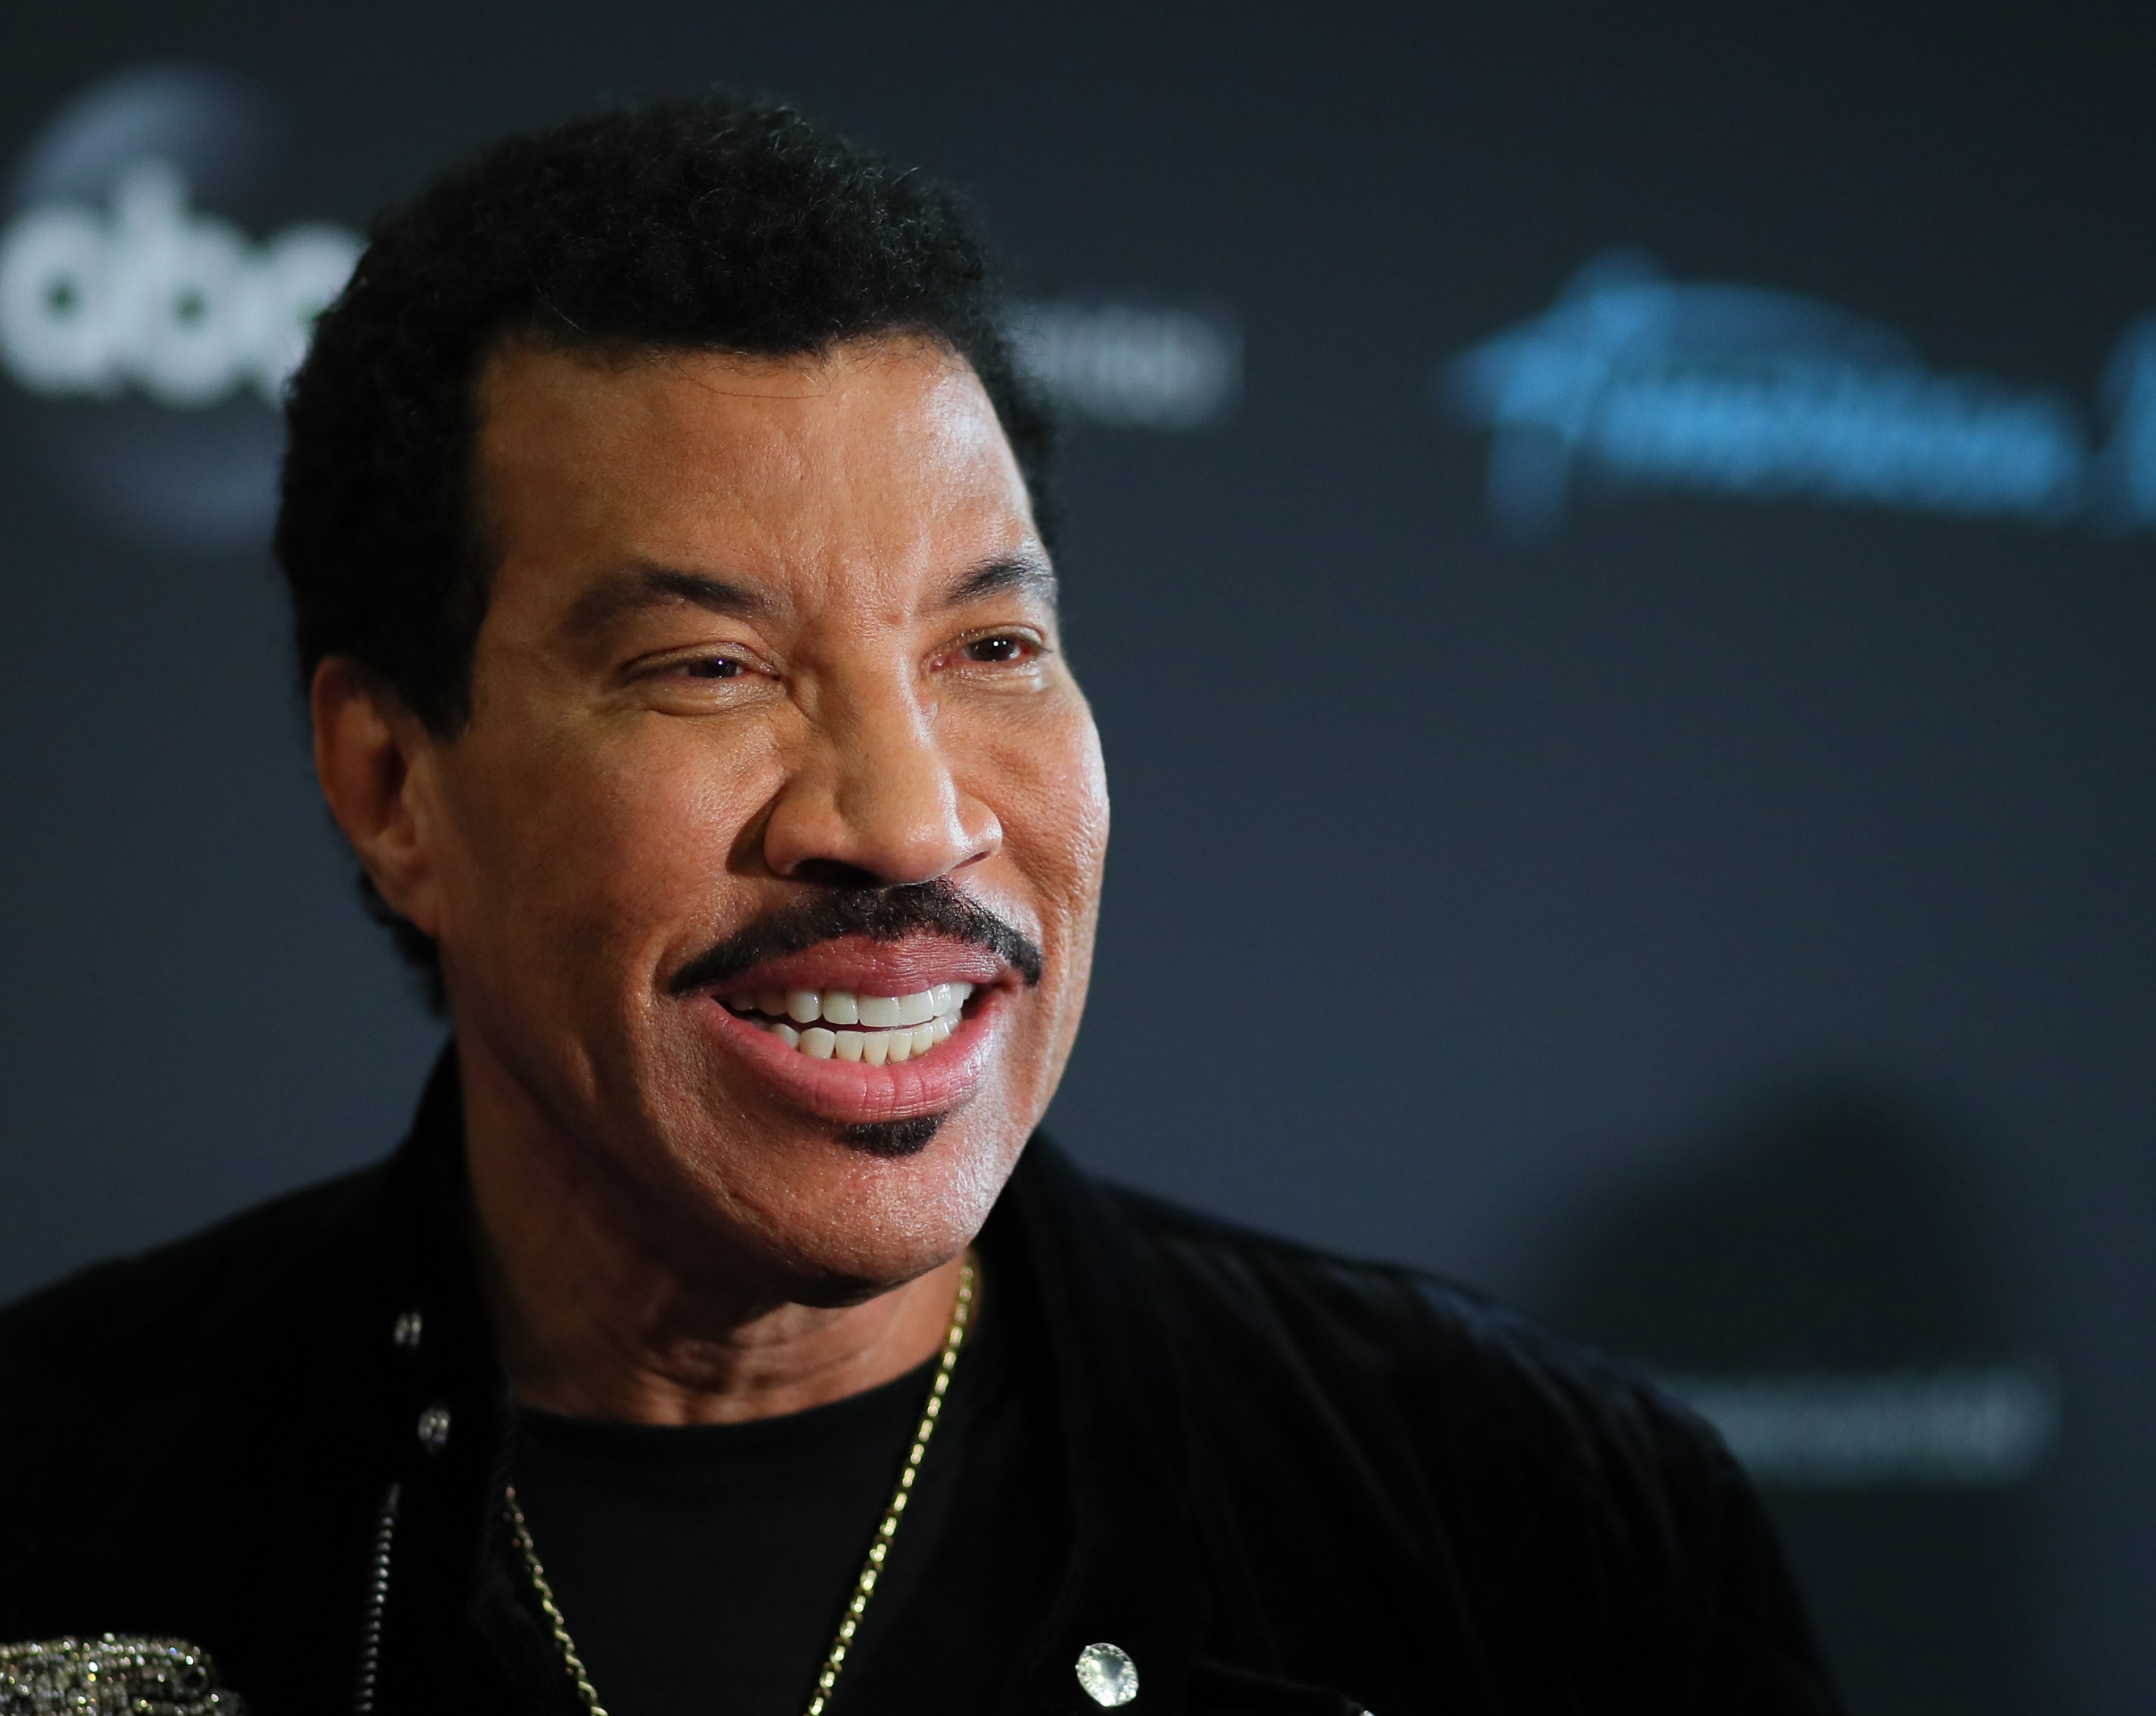 Lionel Richie attends the taping of ABC's 'American Idol' on April 21, 2018 in Los Angeles, California. | Photo: GettyImages